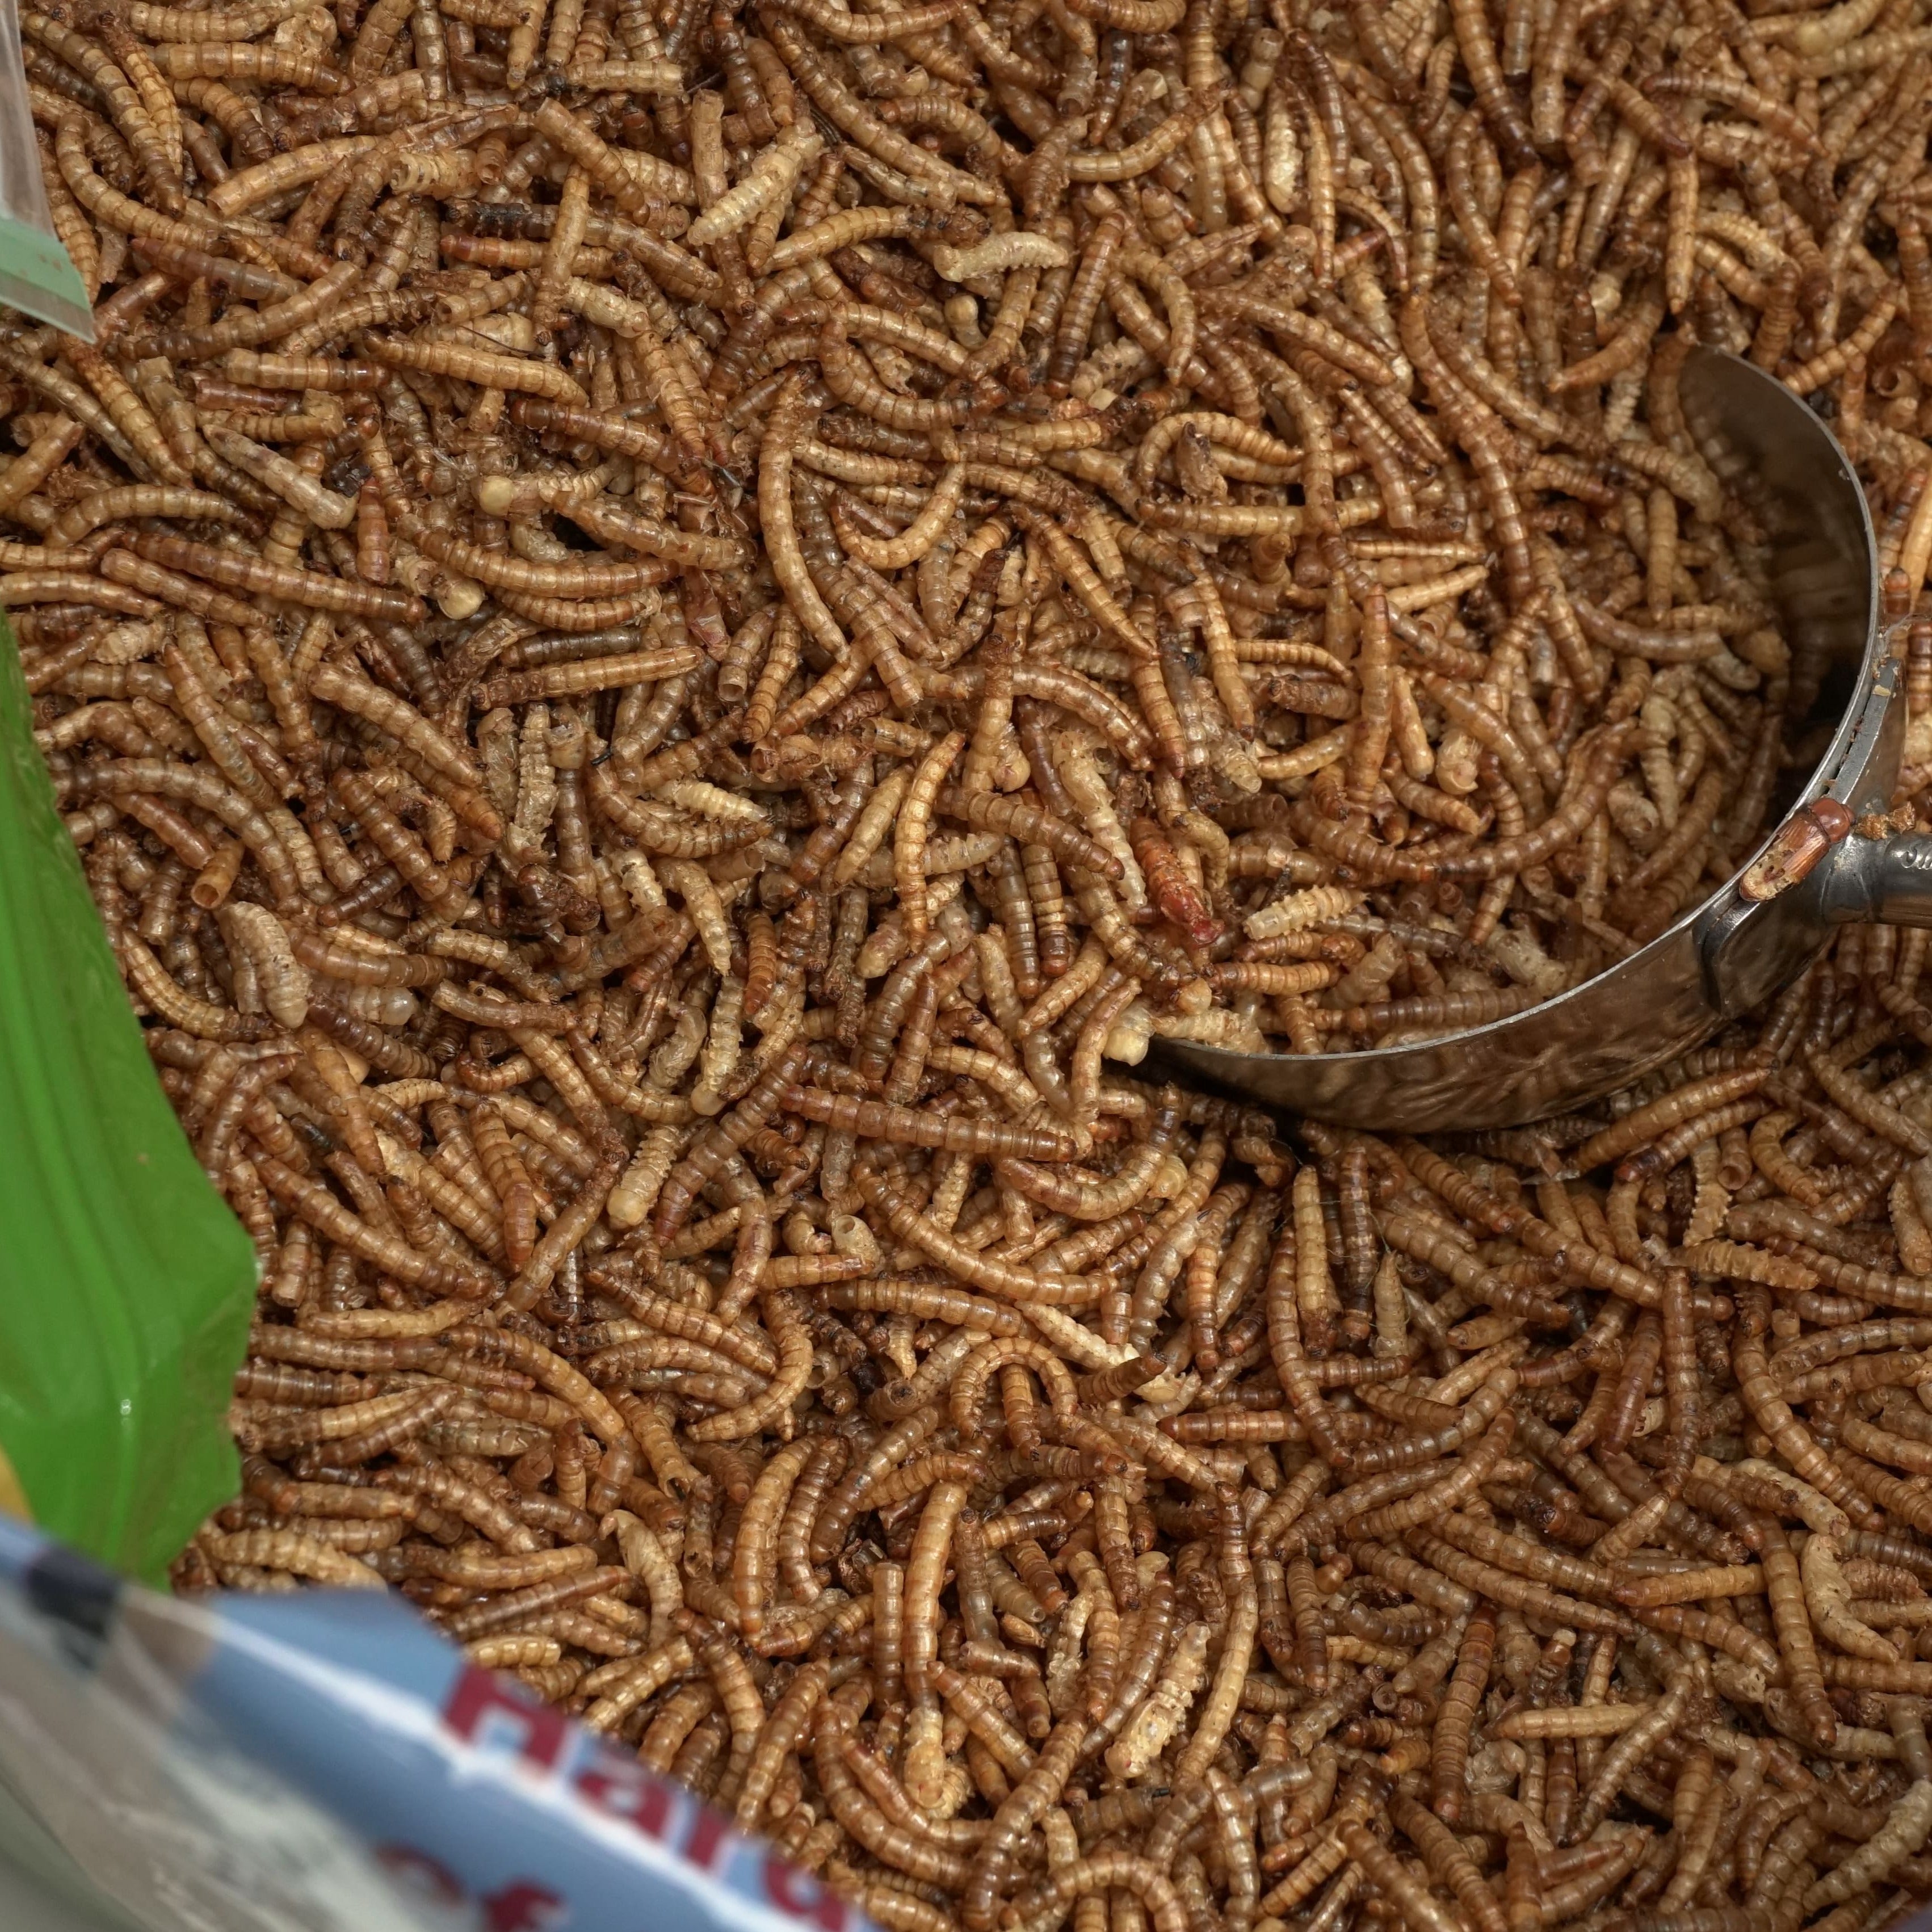 80 lb UCM Dried Mealworms